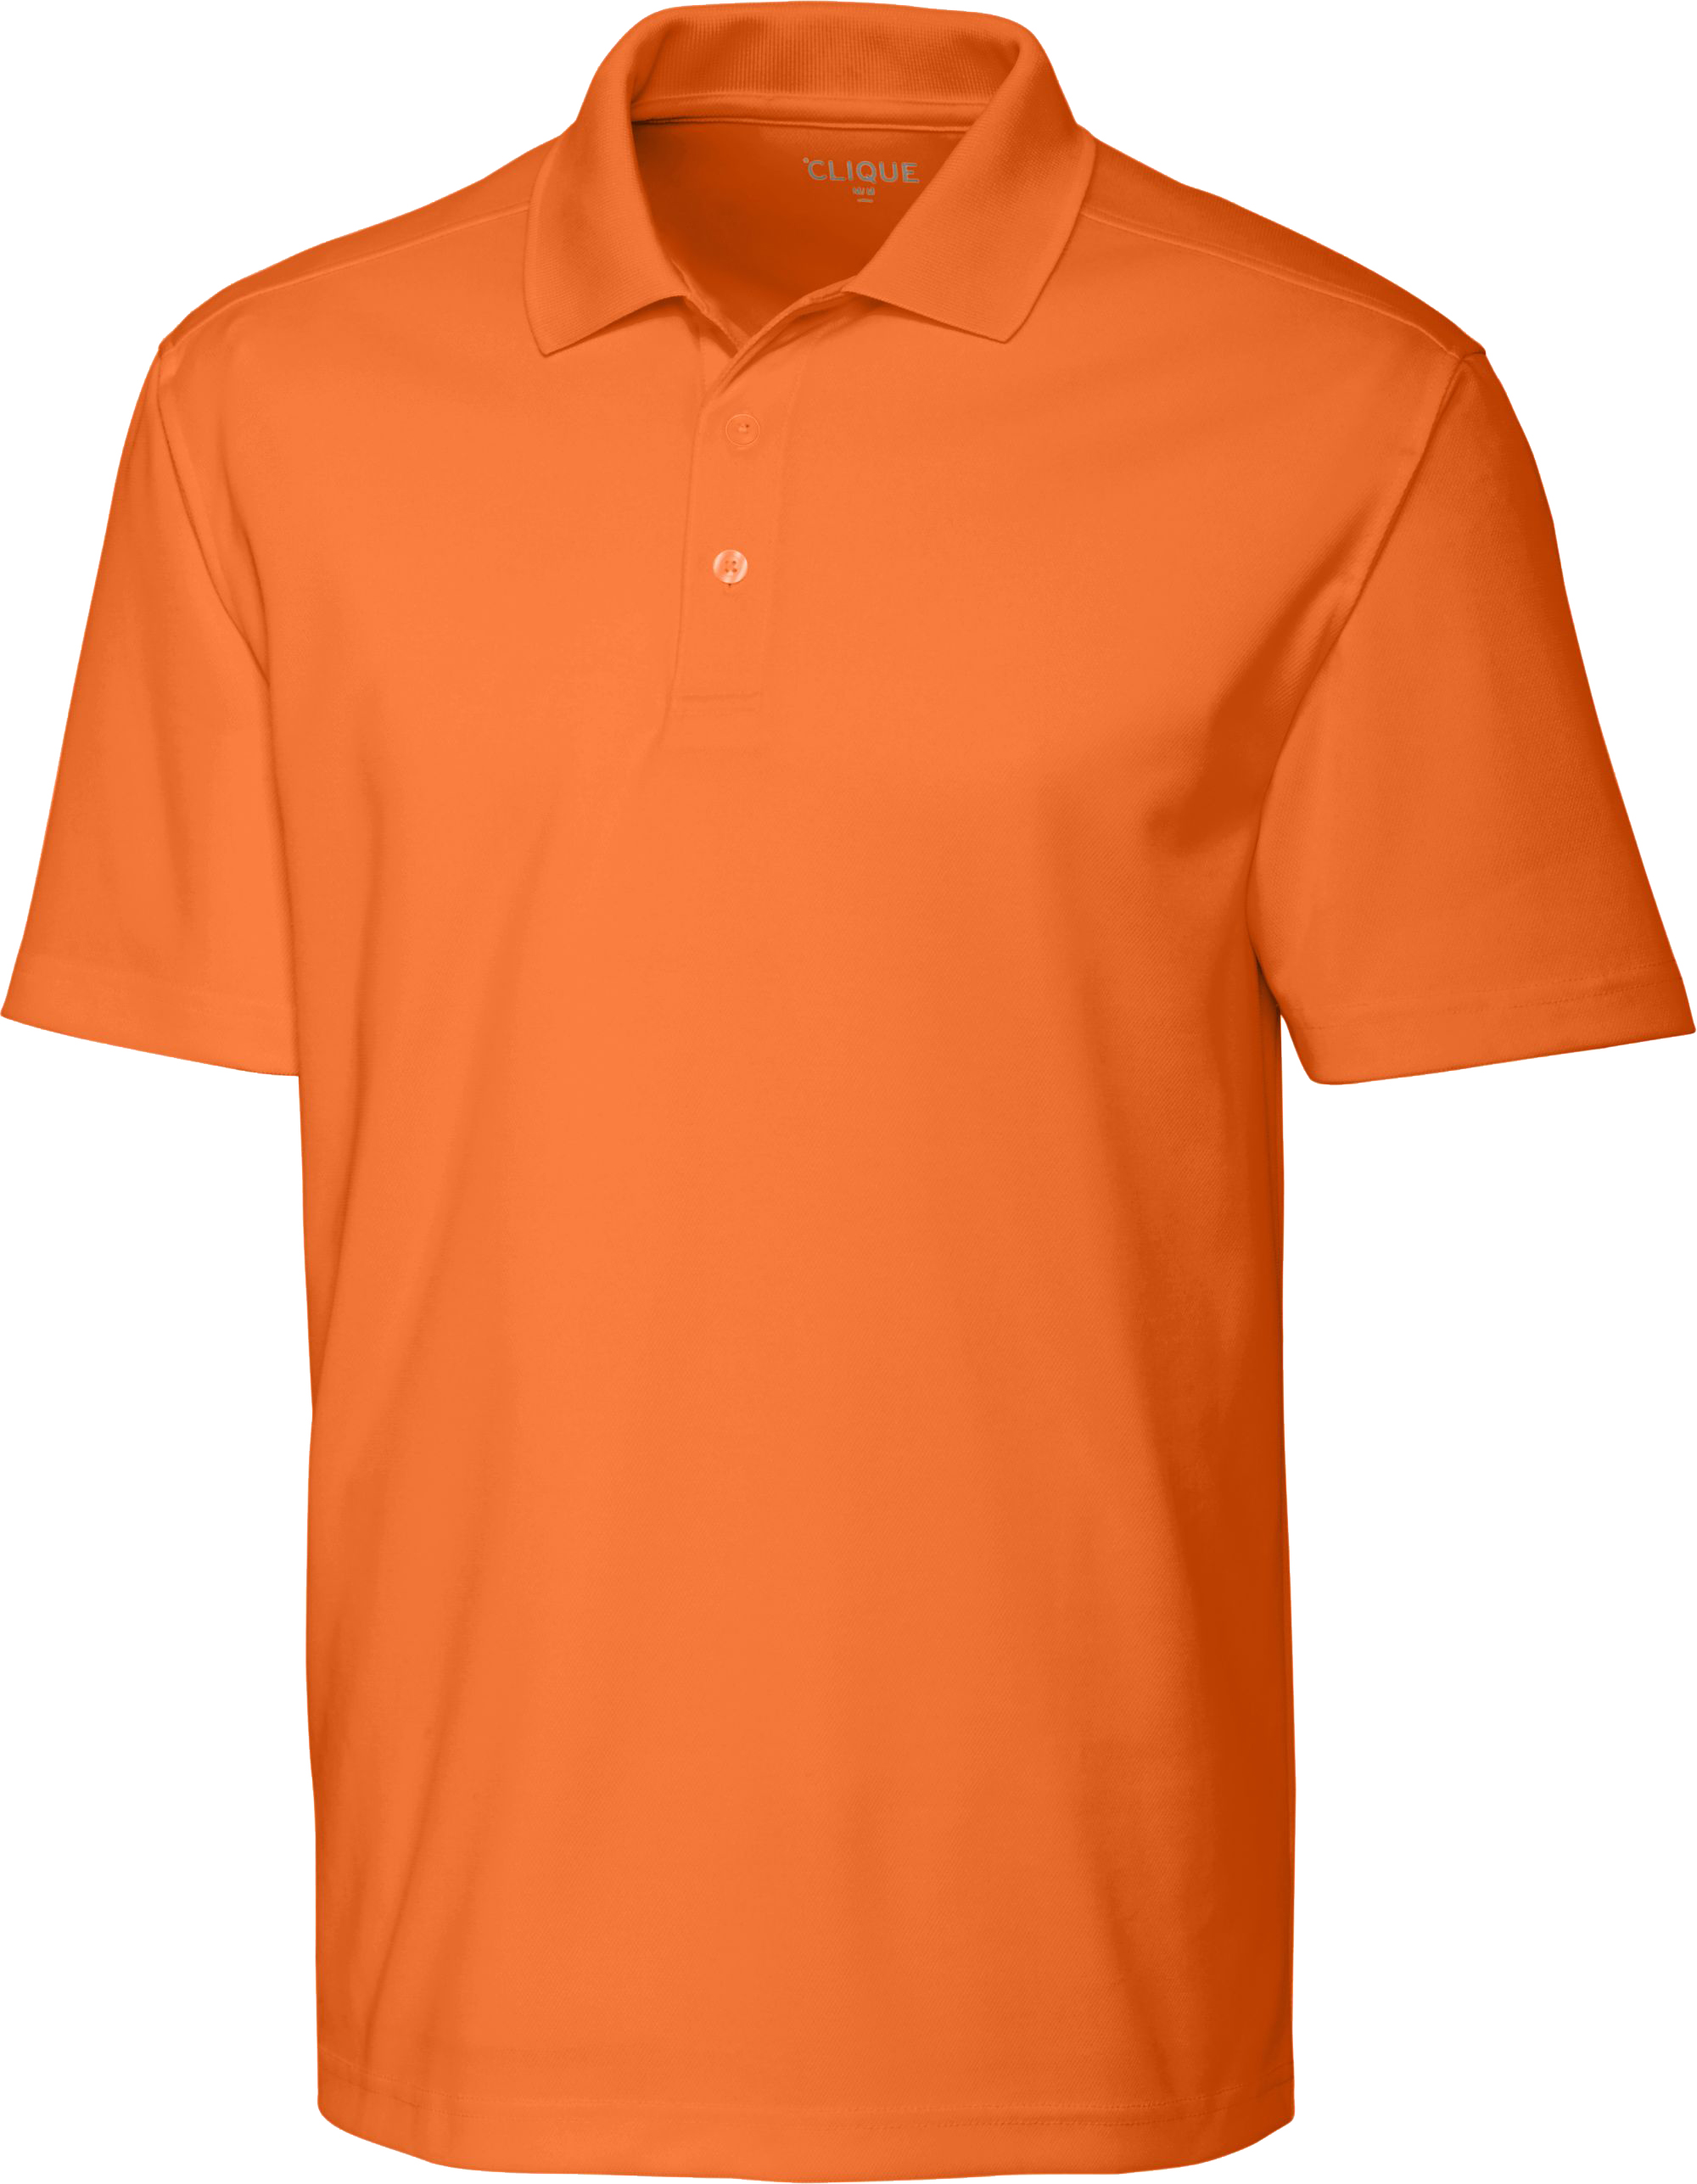 MQK00075 Polo piqué Spin homme